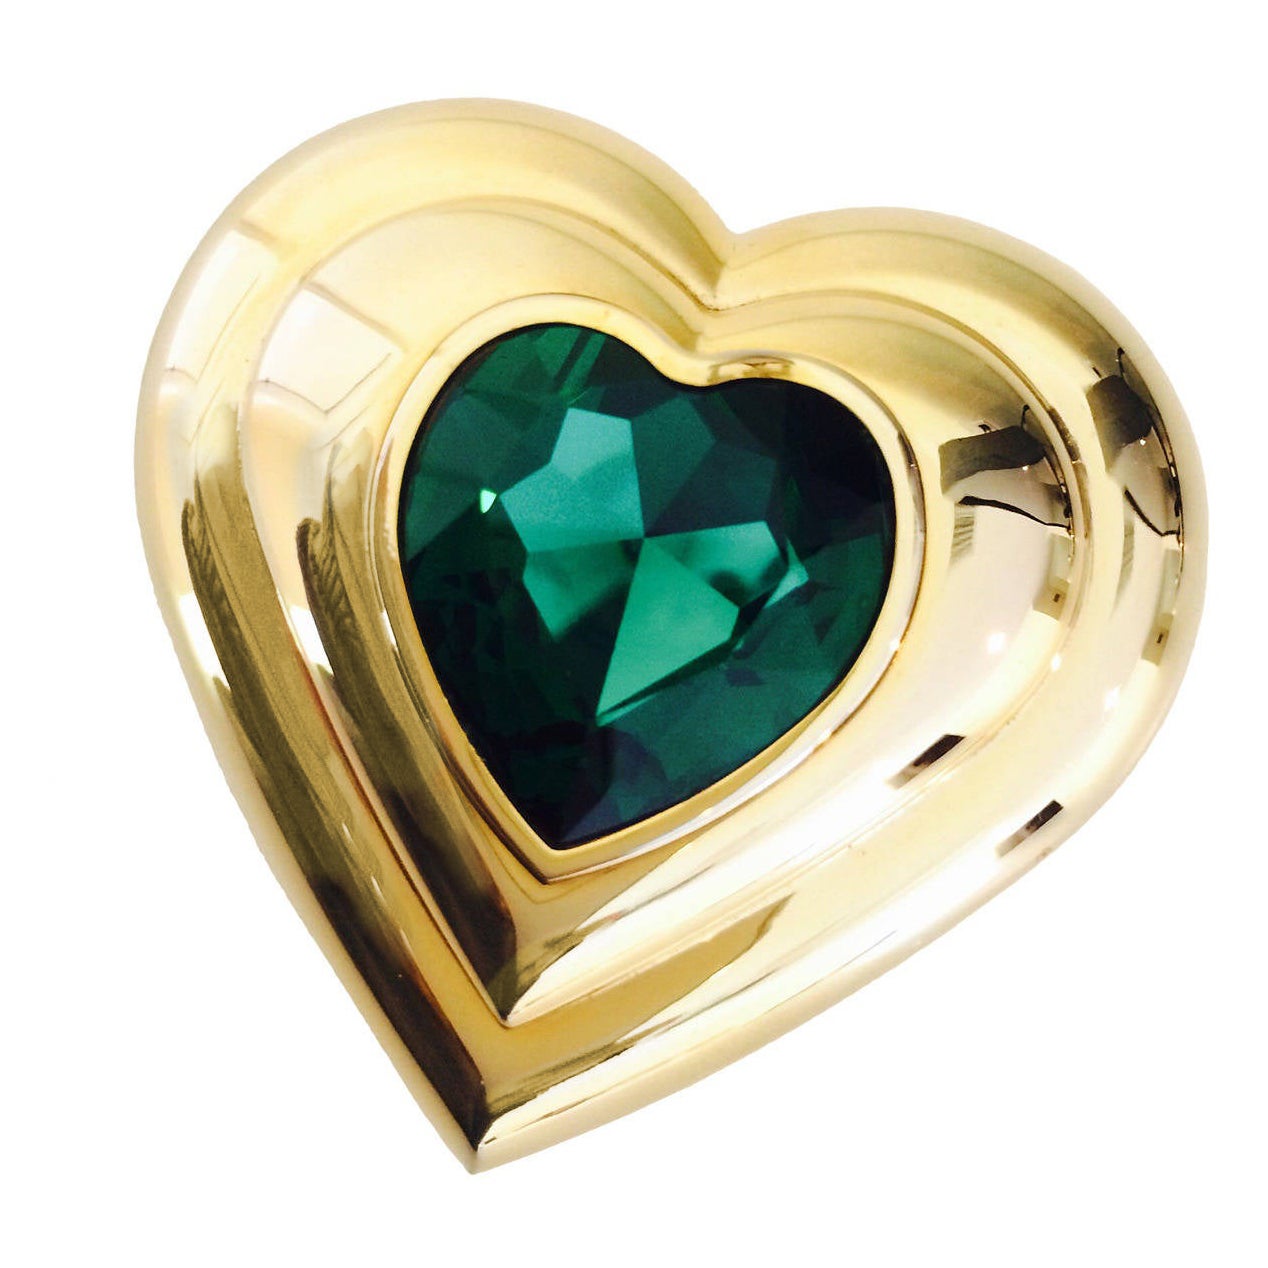 Yves Saint Laurent  Dazzling Emerald Green Crystal  Jewel Heart Compact YSL For Sale